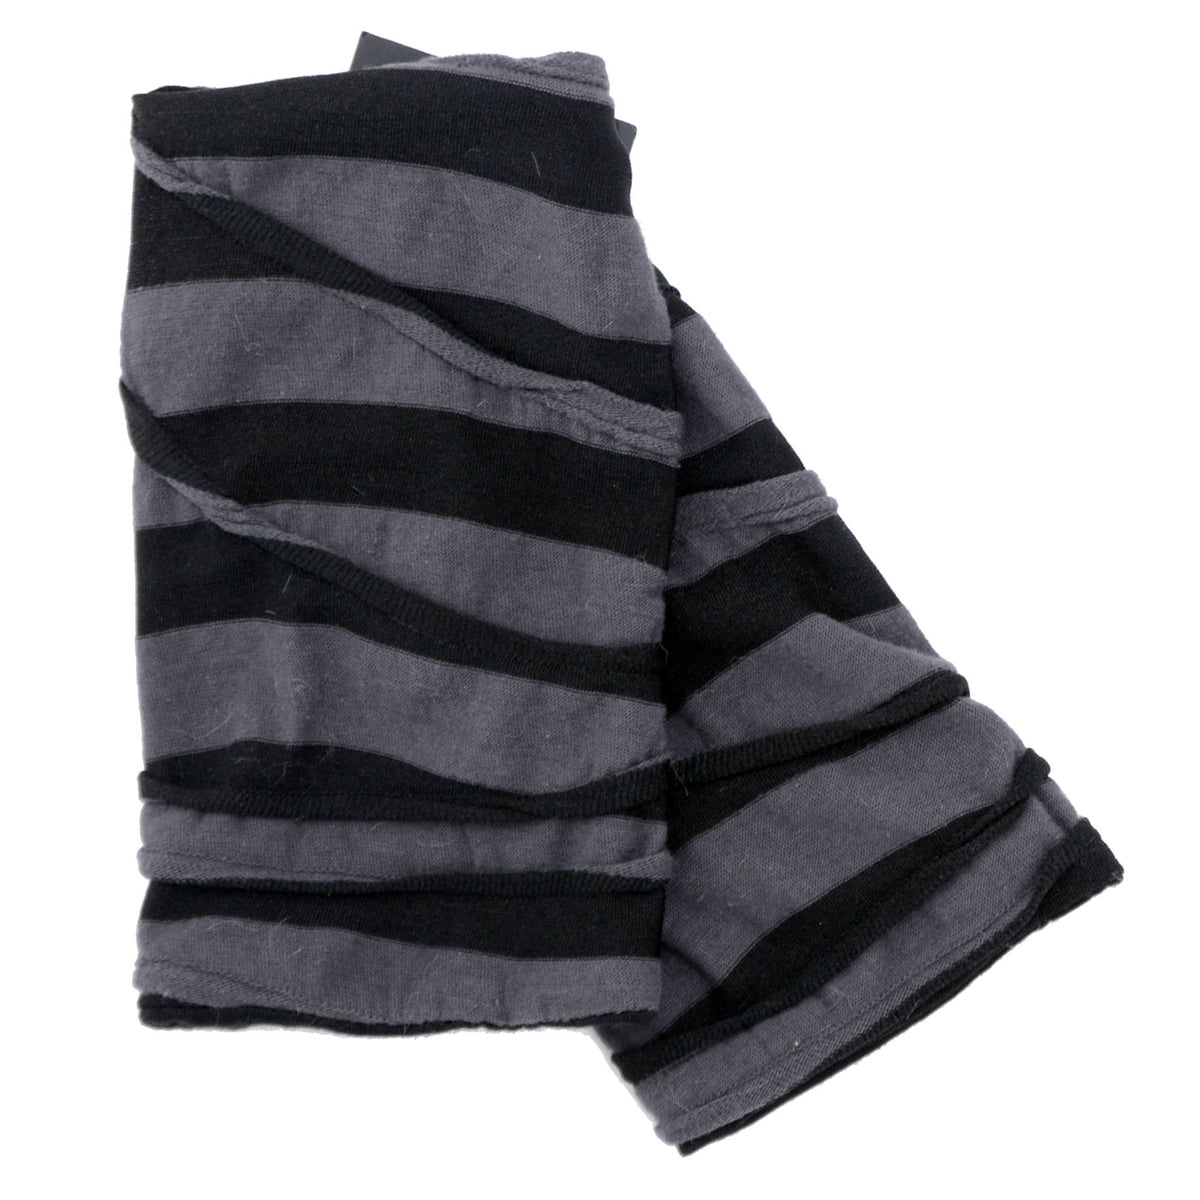 Fingerless Gloves, Asst. - Desert Nights with Abyss Jersey Knit (Limited Availability)